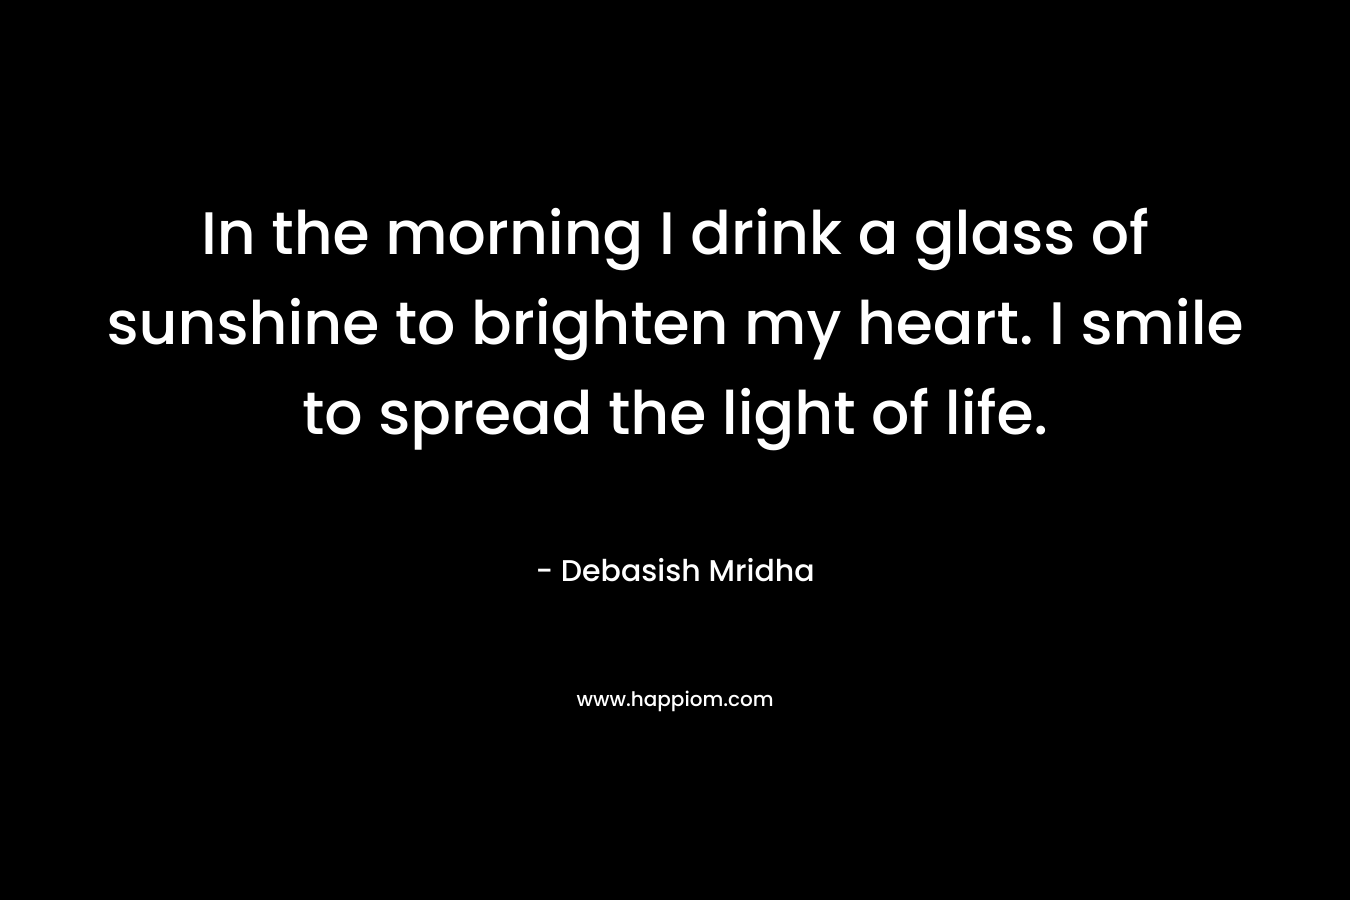 In the morning I drink a glass of sunshine to brighten my heart. I smile to spread the light of life.